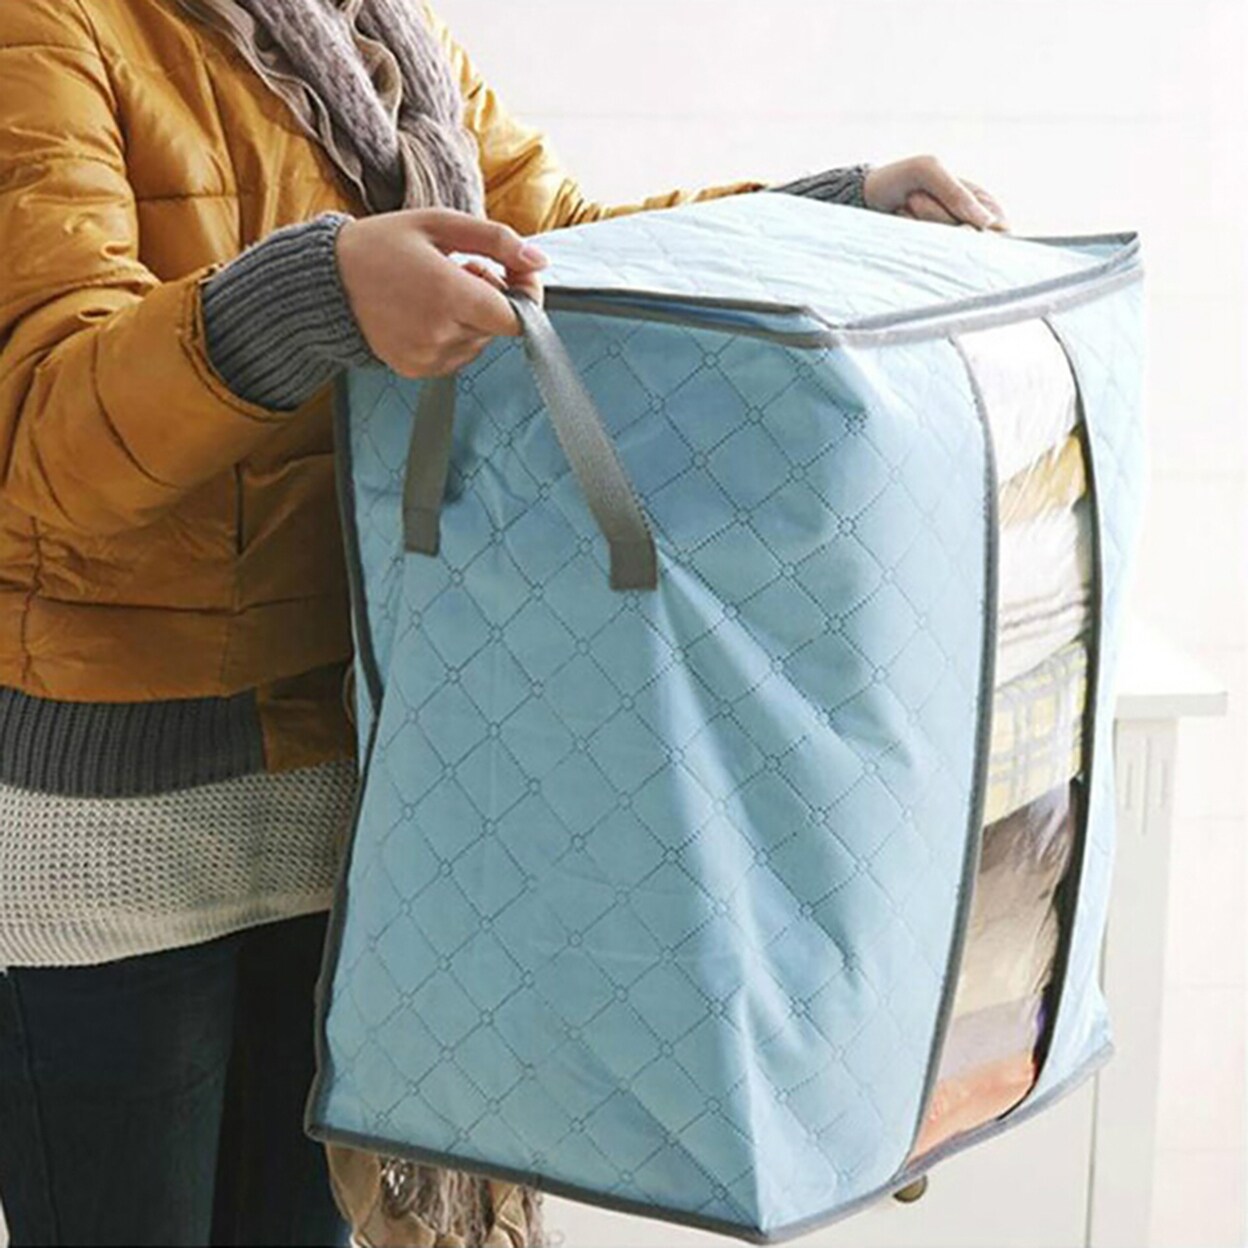 https://ak1.ostkcdn.com/images/products/is/images/direct/103d6107f97d0e1ff4ca3bf2b26b187e9206f3f4/Dirt-Proof-Quilt-Storage-Bag-With-Zipper-Non-Woven-Fabric-Tear-Resistant-Blanket-Storage-Bag-For-Sweaters.jpg